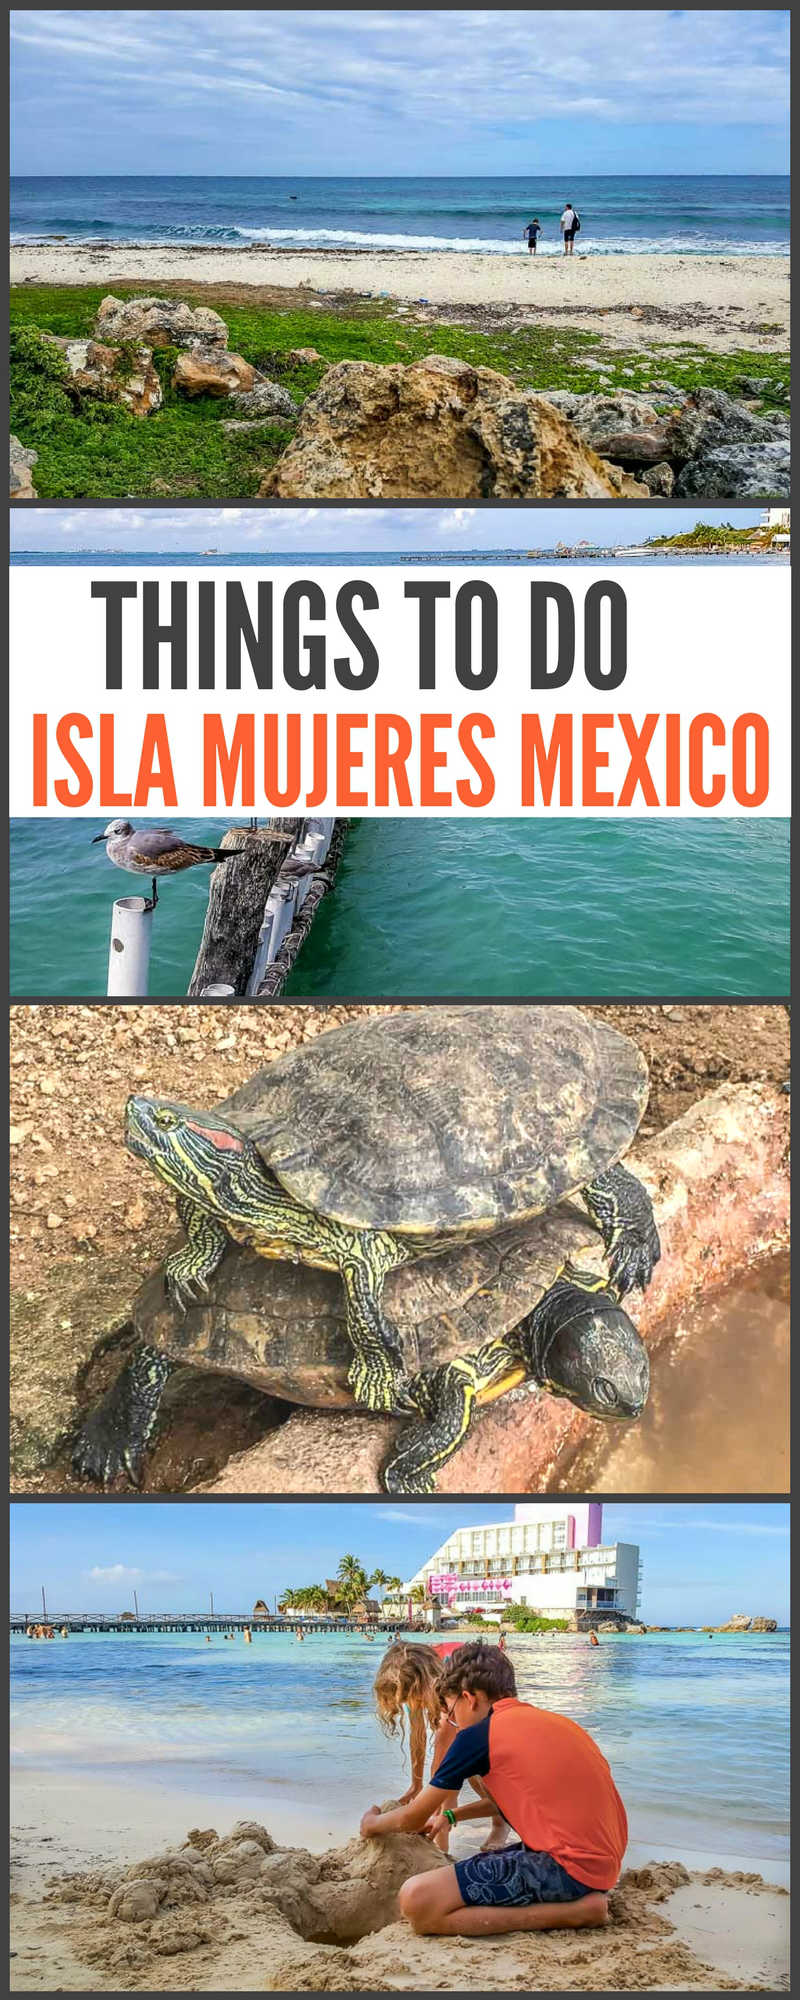 Things to do in Isla Mujeres Mexico. We've written about Mexico's Isla Mujeres a few times over the years and, to be honest, not much has changed. Of course it's grown, but that only means more golf cart rentals and more options. We don't find that it's gotten any busier and it seems there's just more to do there these days with a lot more things to do and see.